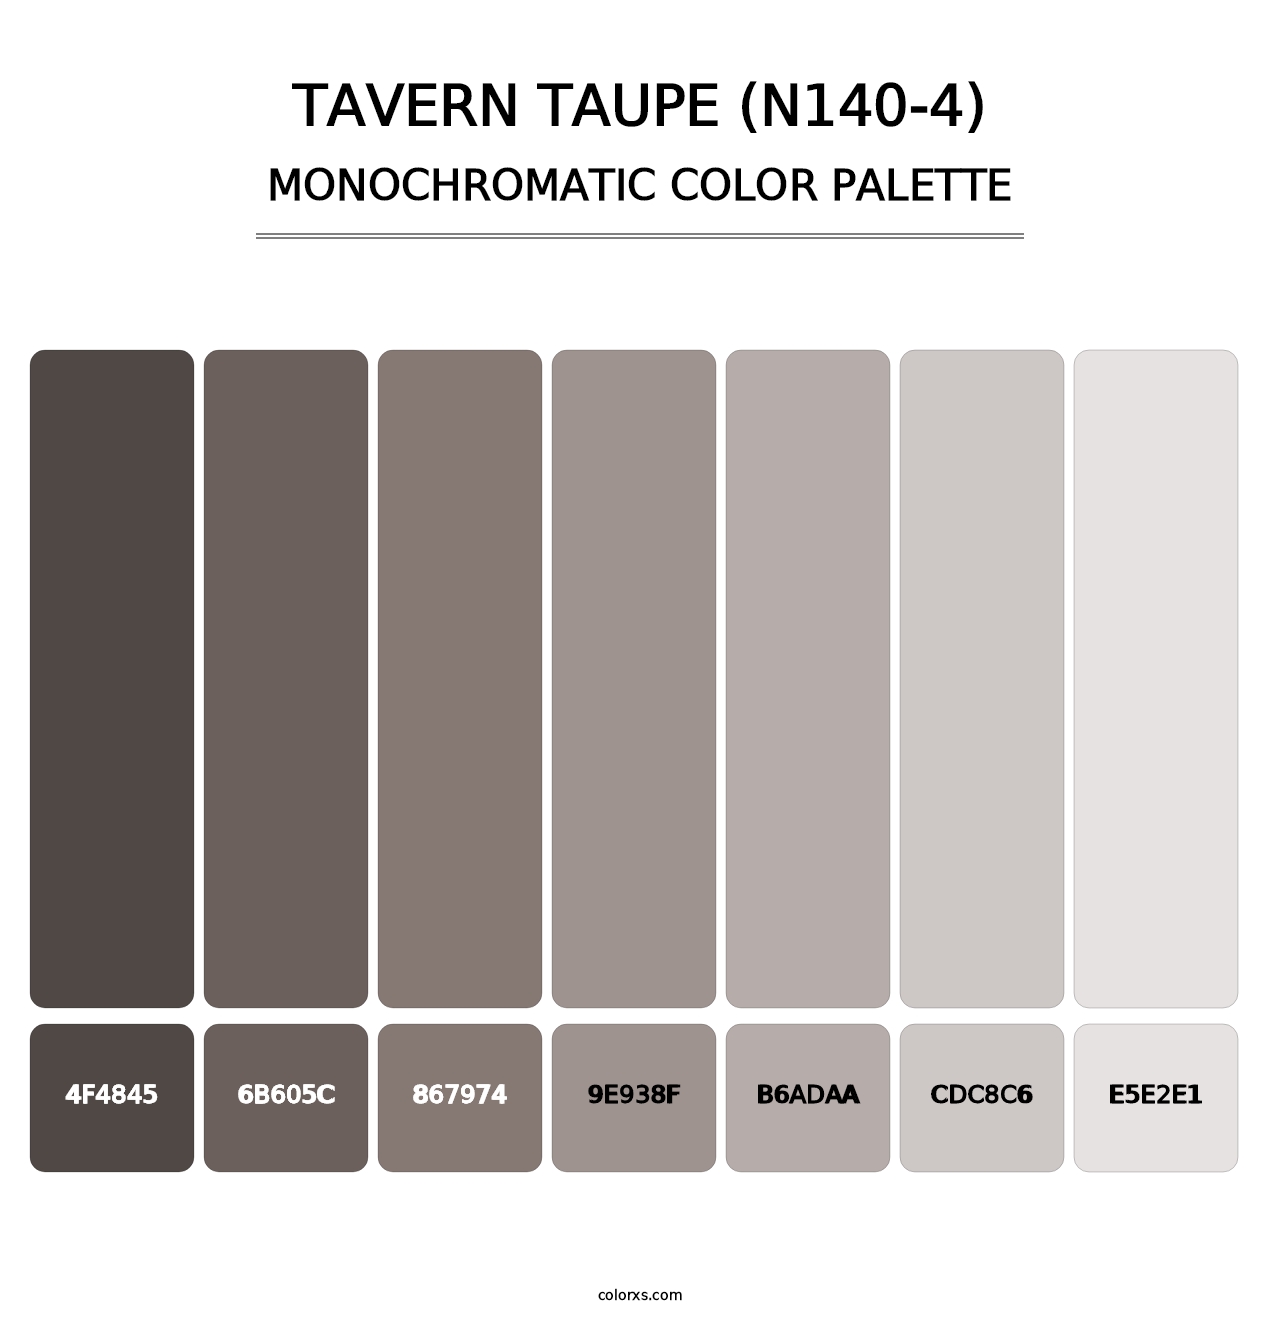 Tavern Taupe (N140-4) - Monochromatic Color Palette